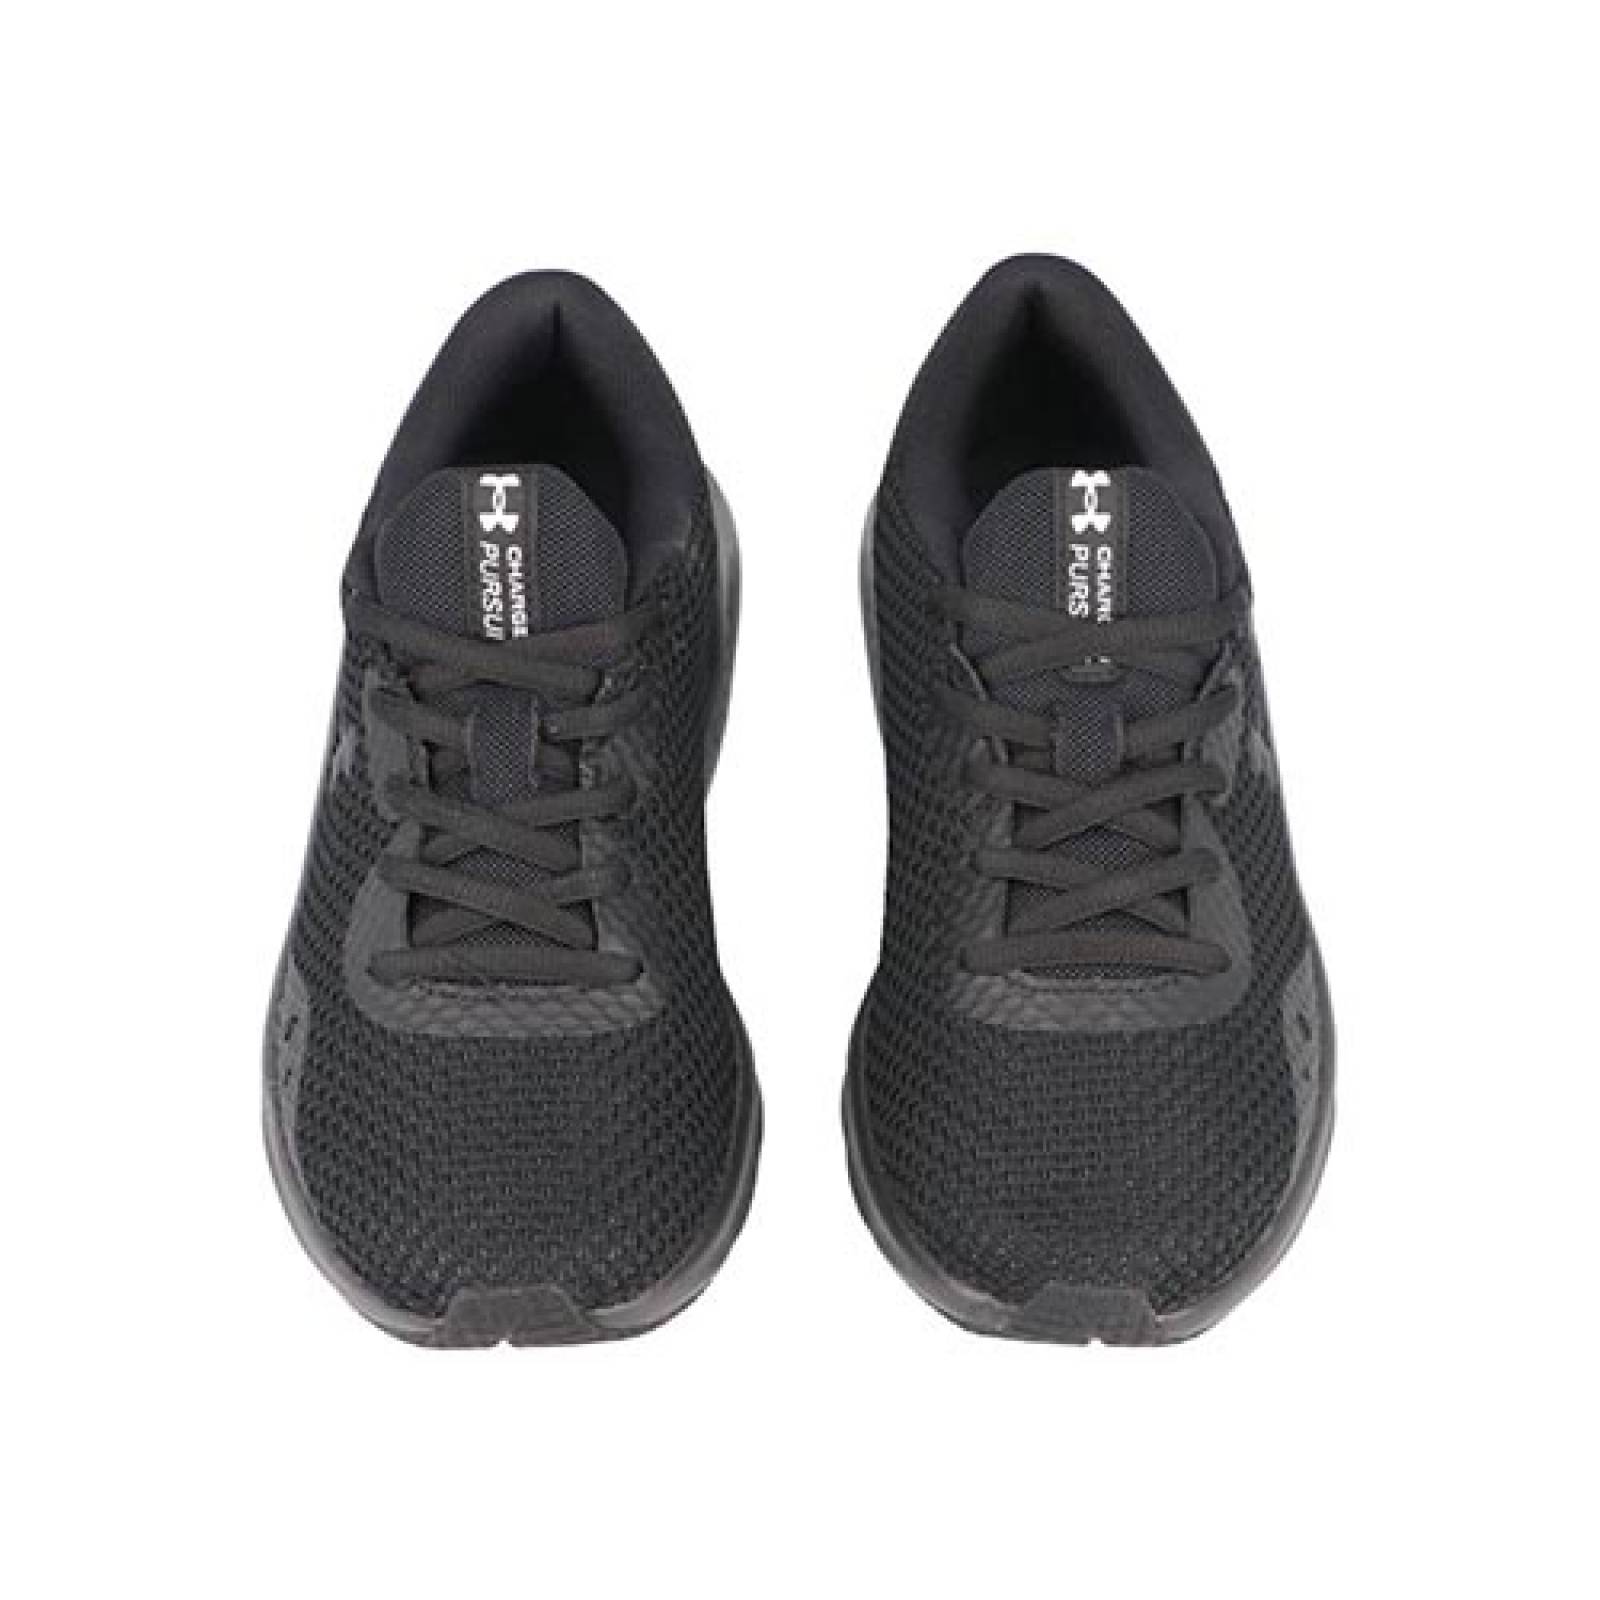 Tenis Mujer Under Armour Charged 89002 Transpirable Gym Dama